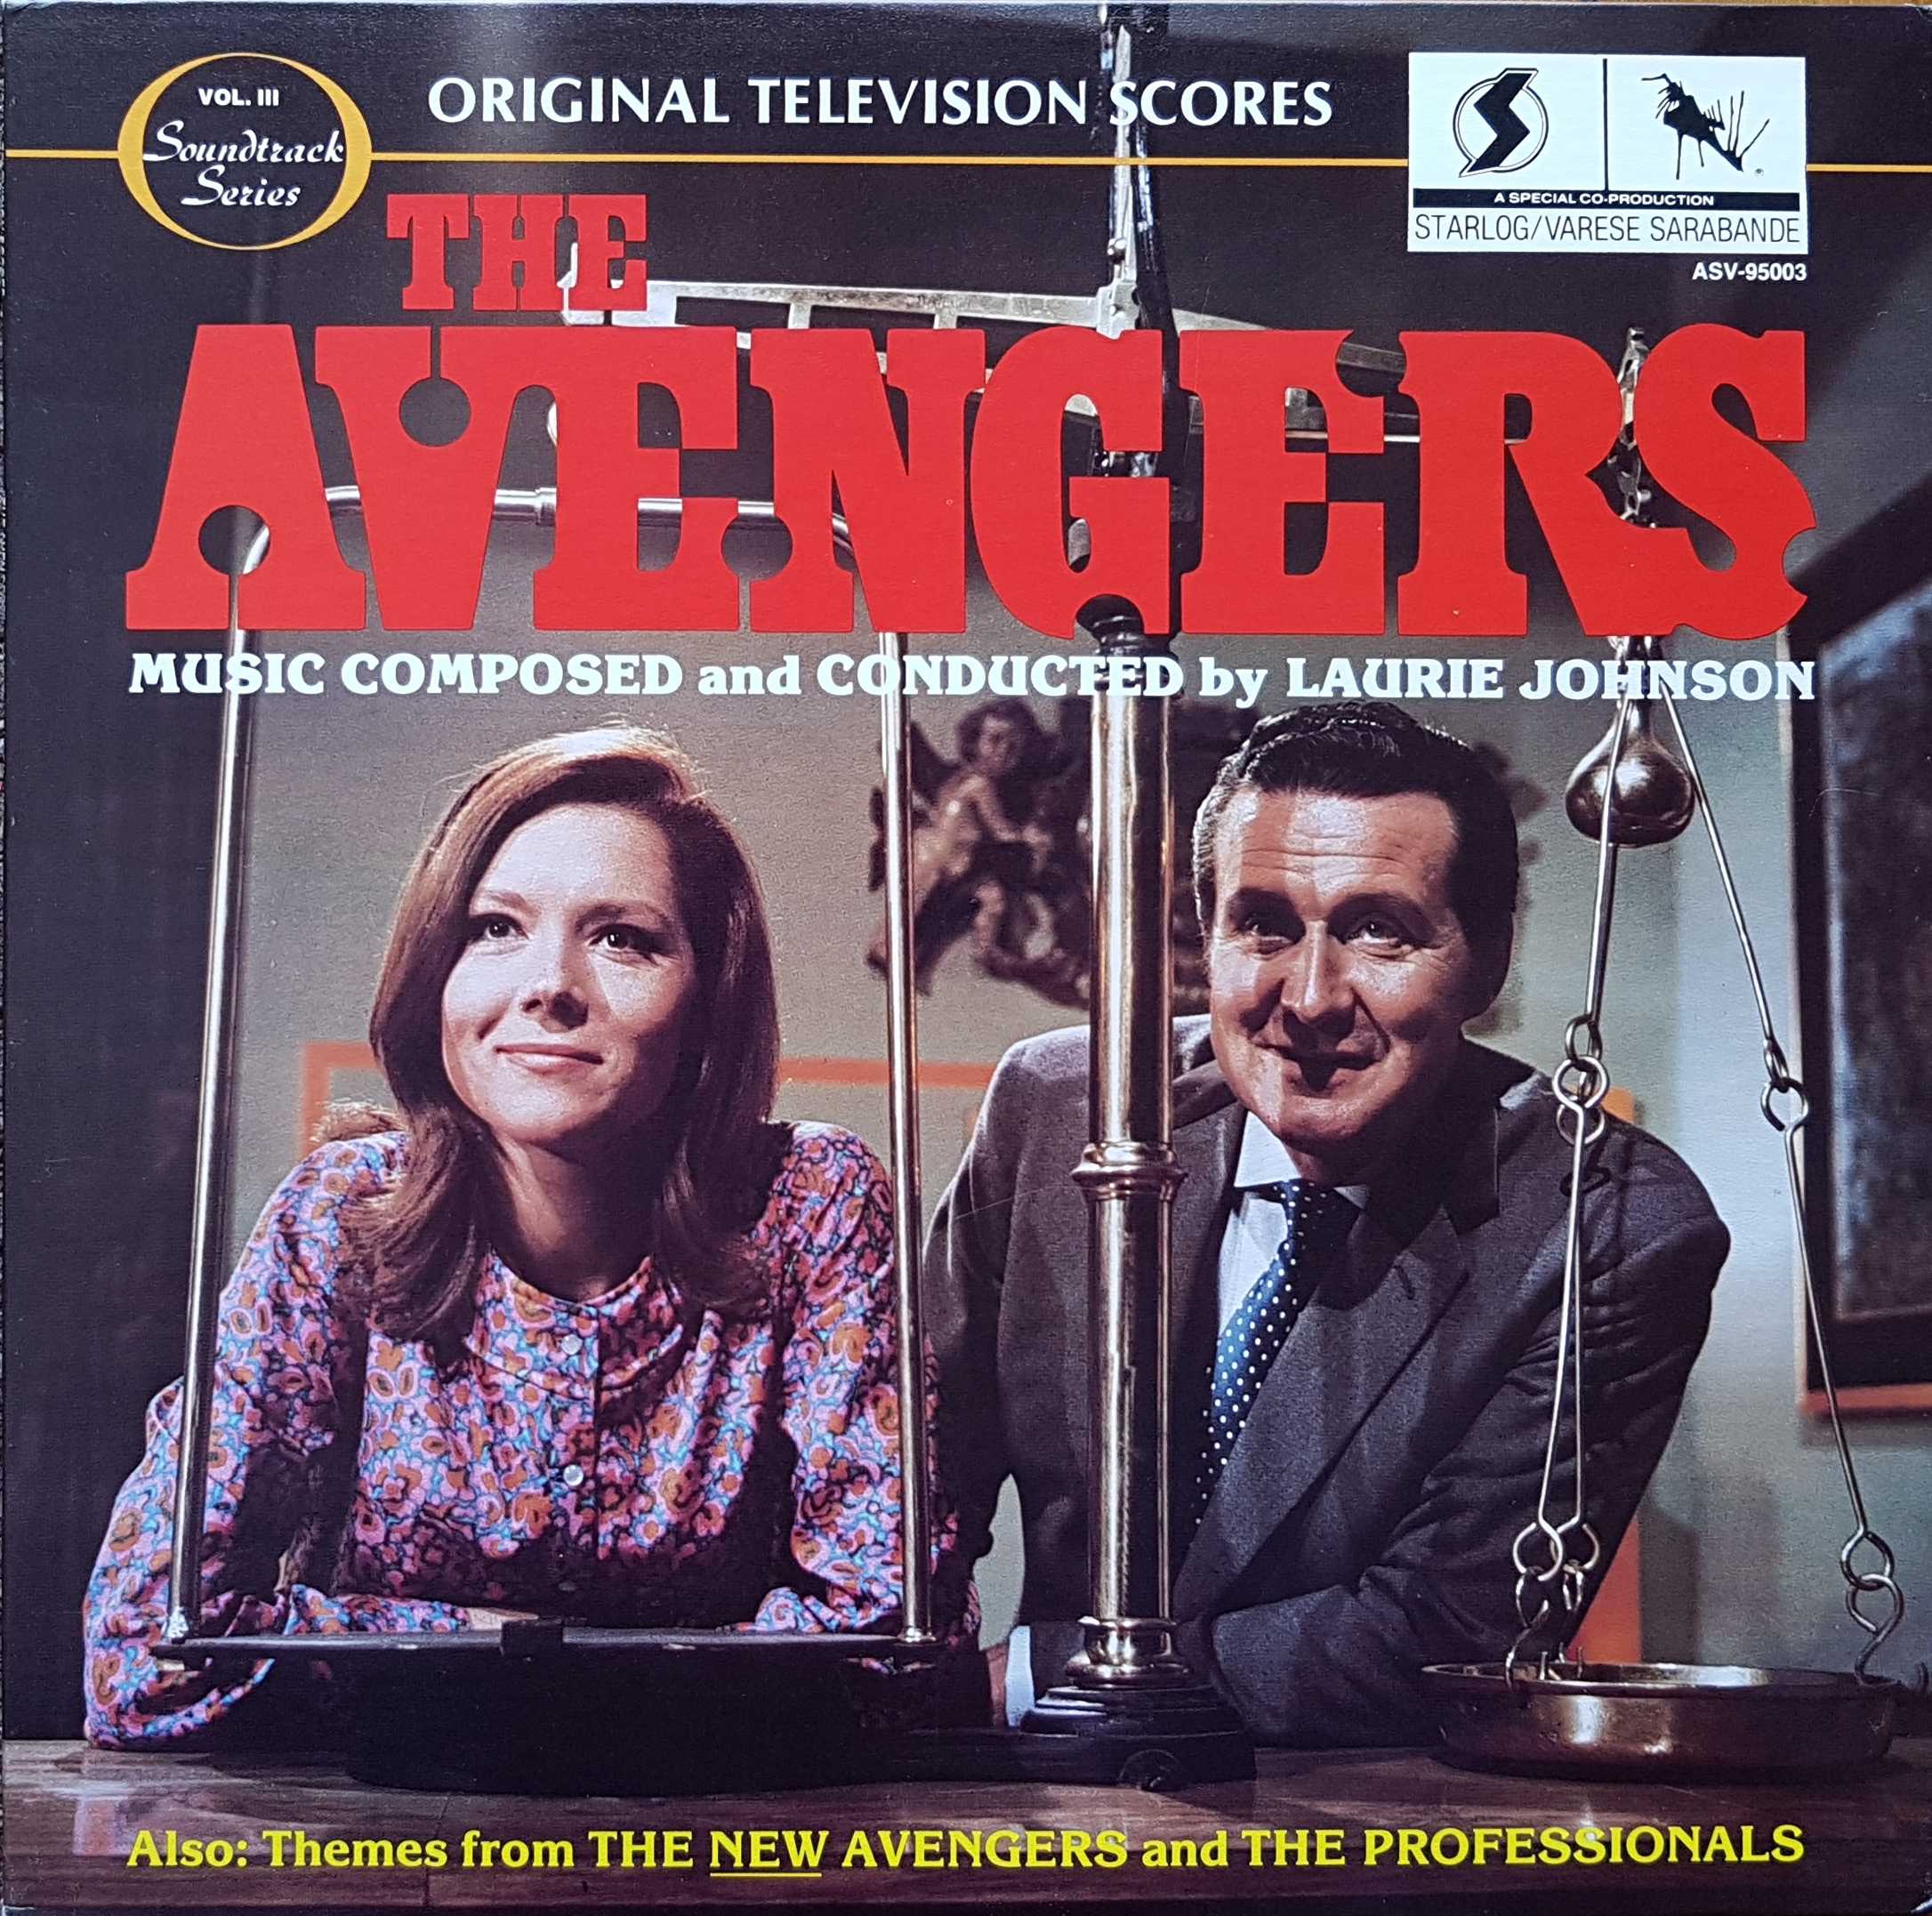 Picture of The avengers / The professionals by artist Laurie Johnson from ITV, Channel 4 and Channel 5 albums library